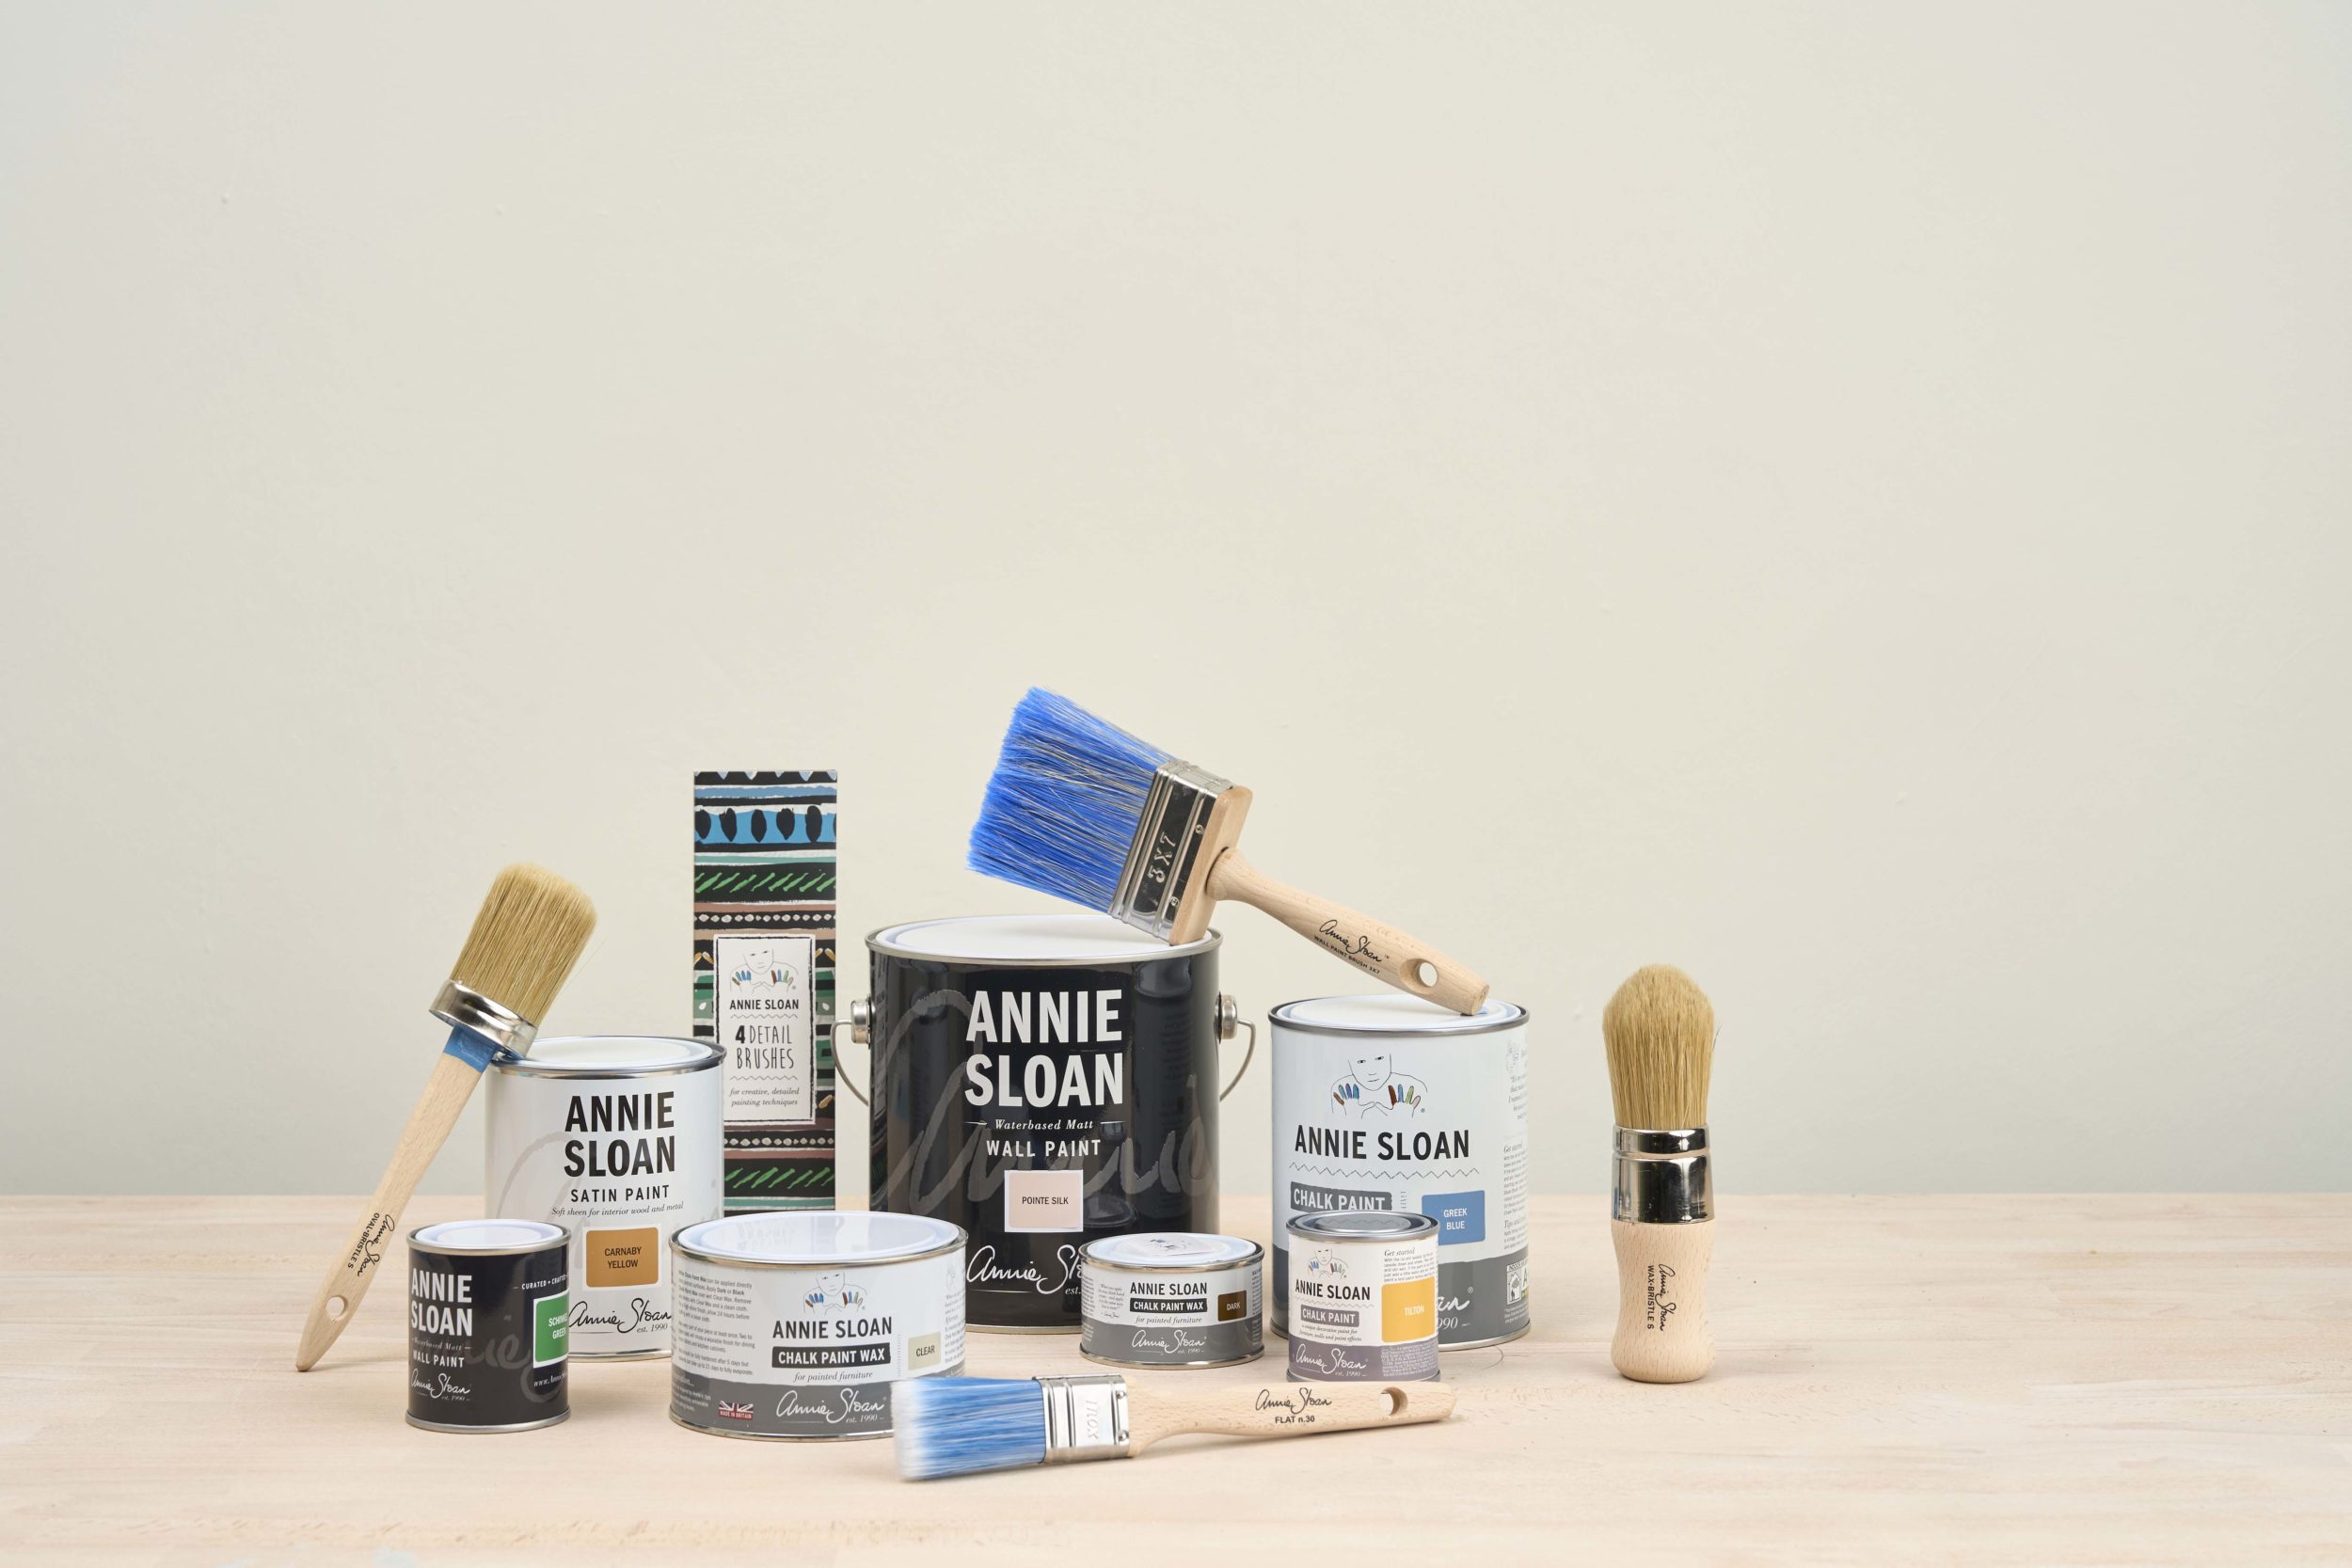 Group Shot of Annie Sloan Paint and Accessories